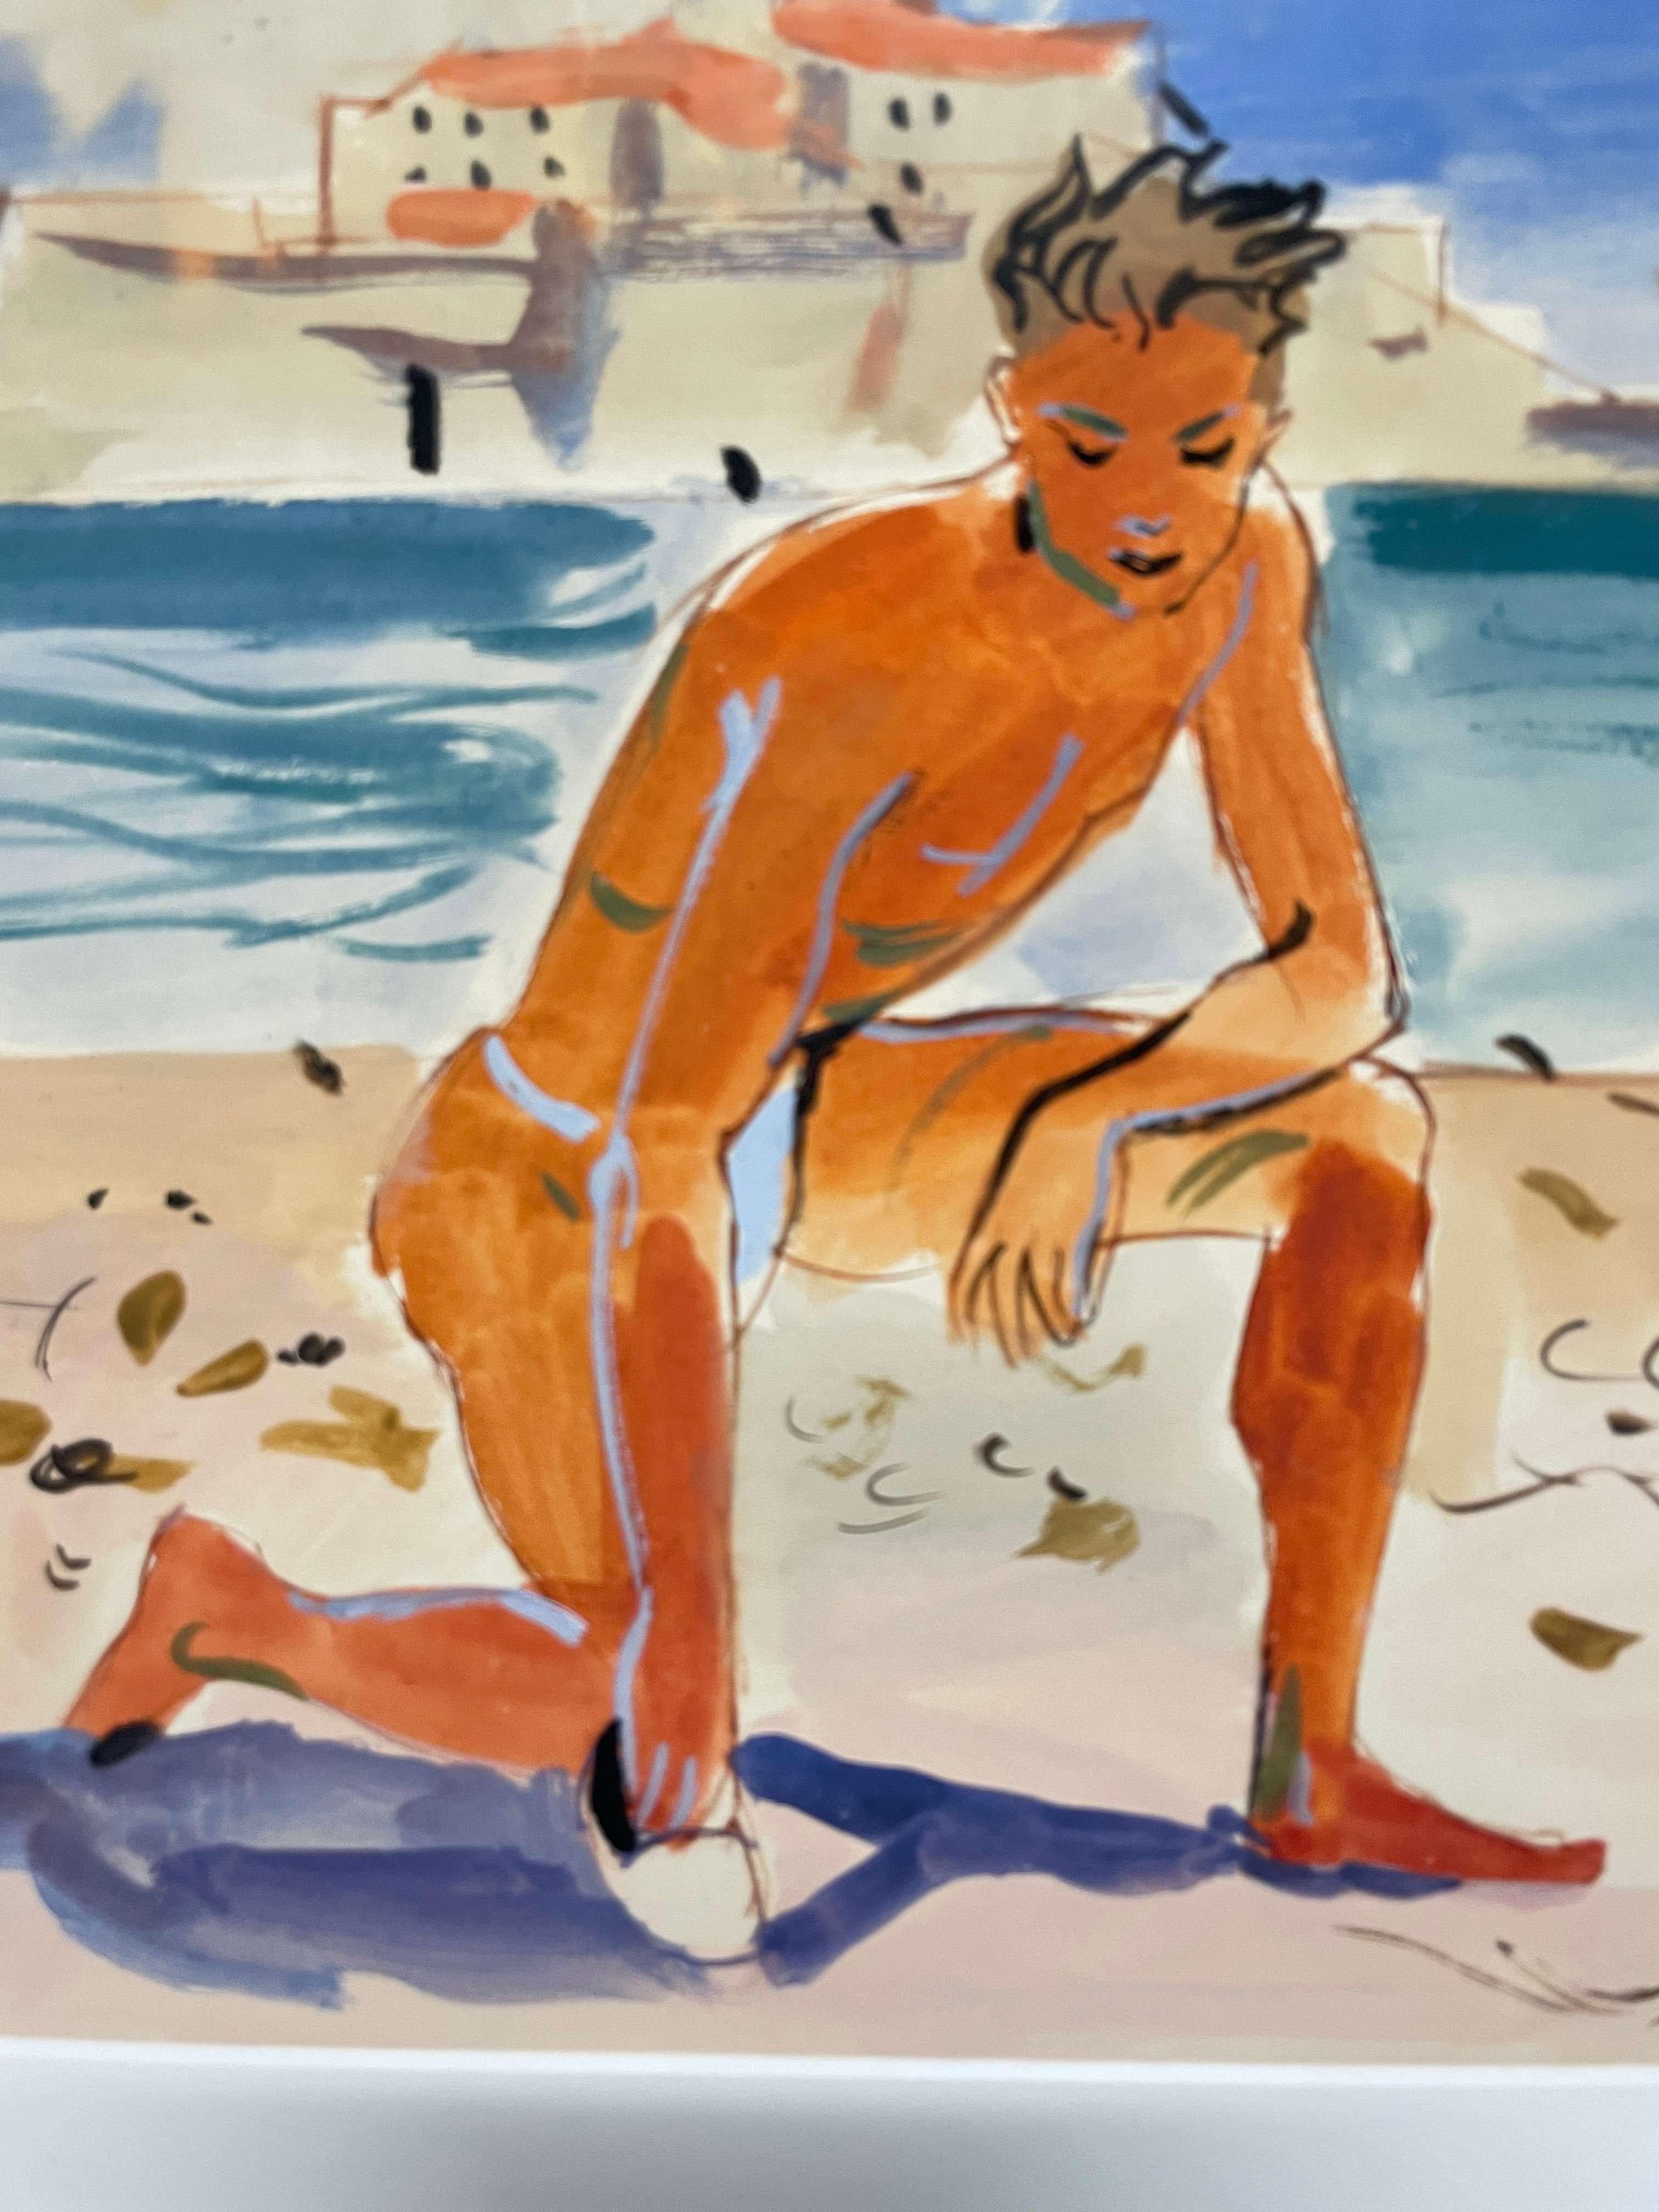 A Mid-Century watercolor of a male bather kneeling on a beach in the Côte d' Azur by artist Andre Delfau.

Born in Paris, France in 1914, Andre Delfau became an internationally acclaimed stage, set and costume designer who worked world-wide from the